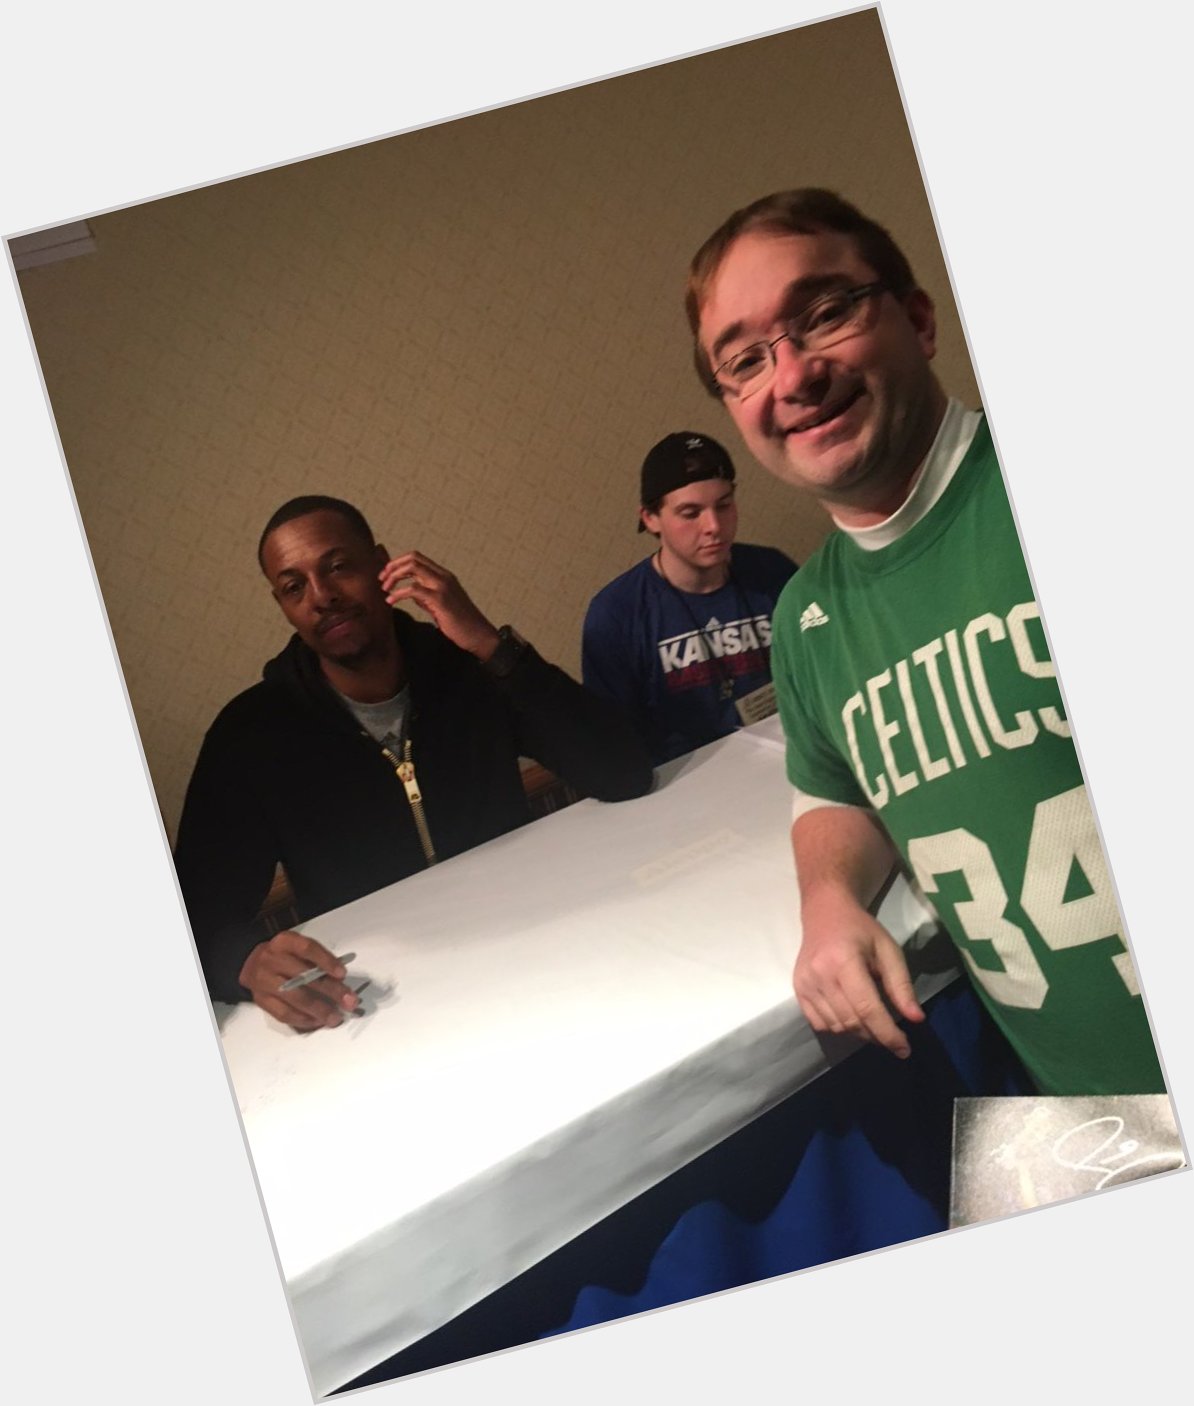 Happy birthday Paul Pierce and thank you for the greatest photo ever taken 